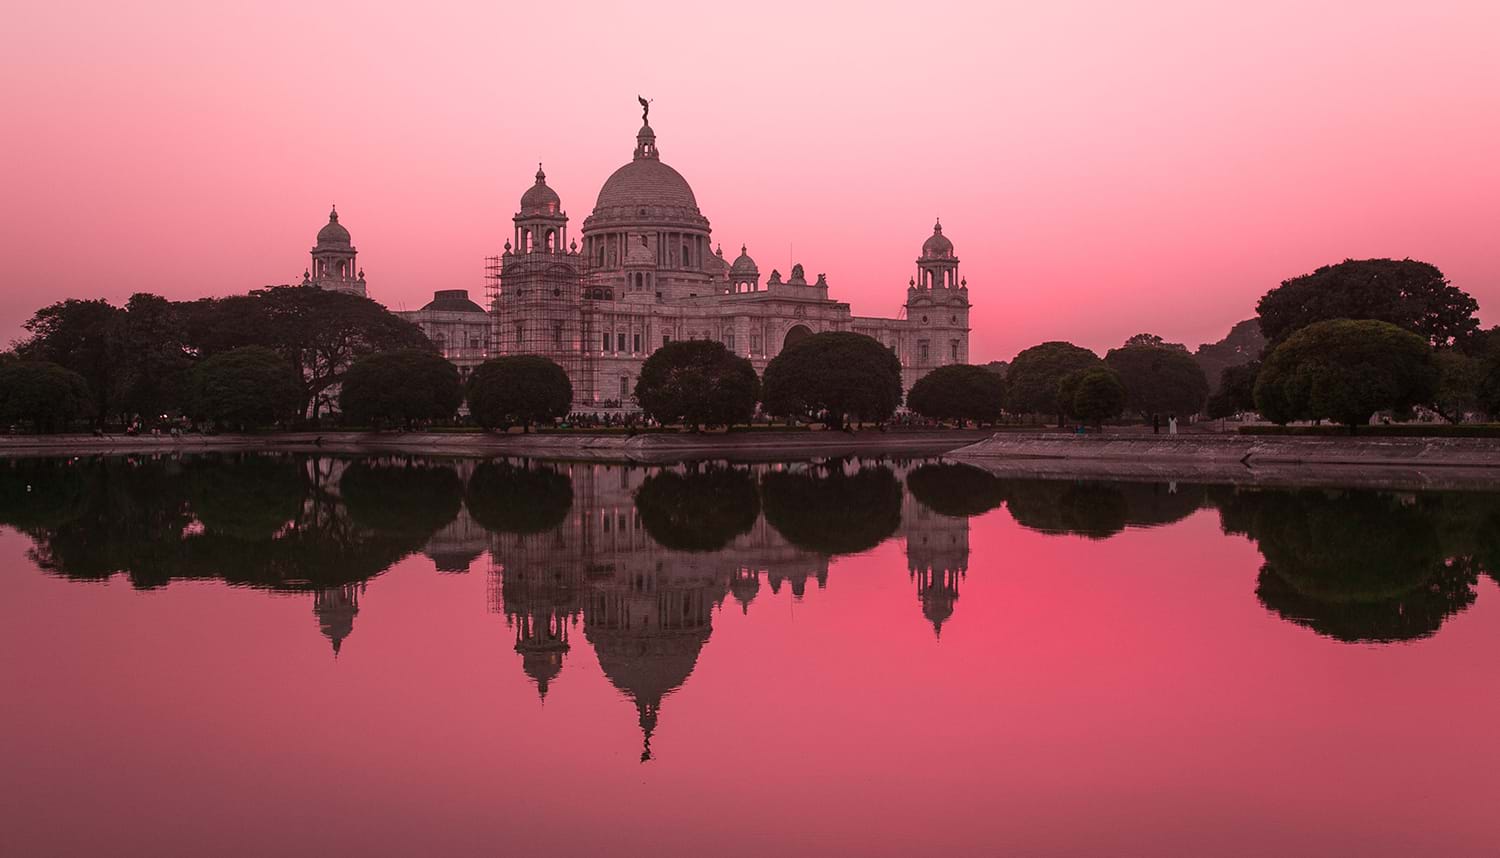 Domed building and pink sky reflected off water